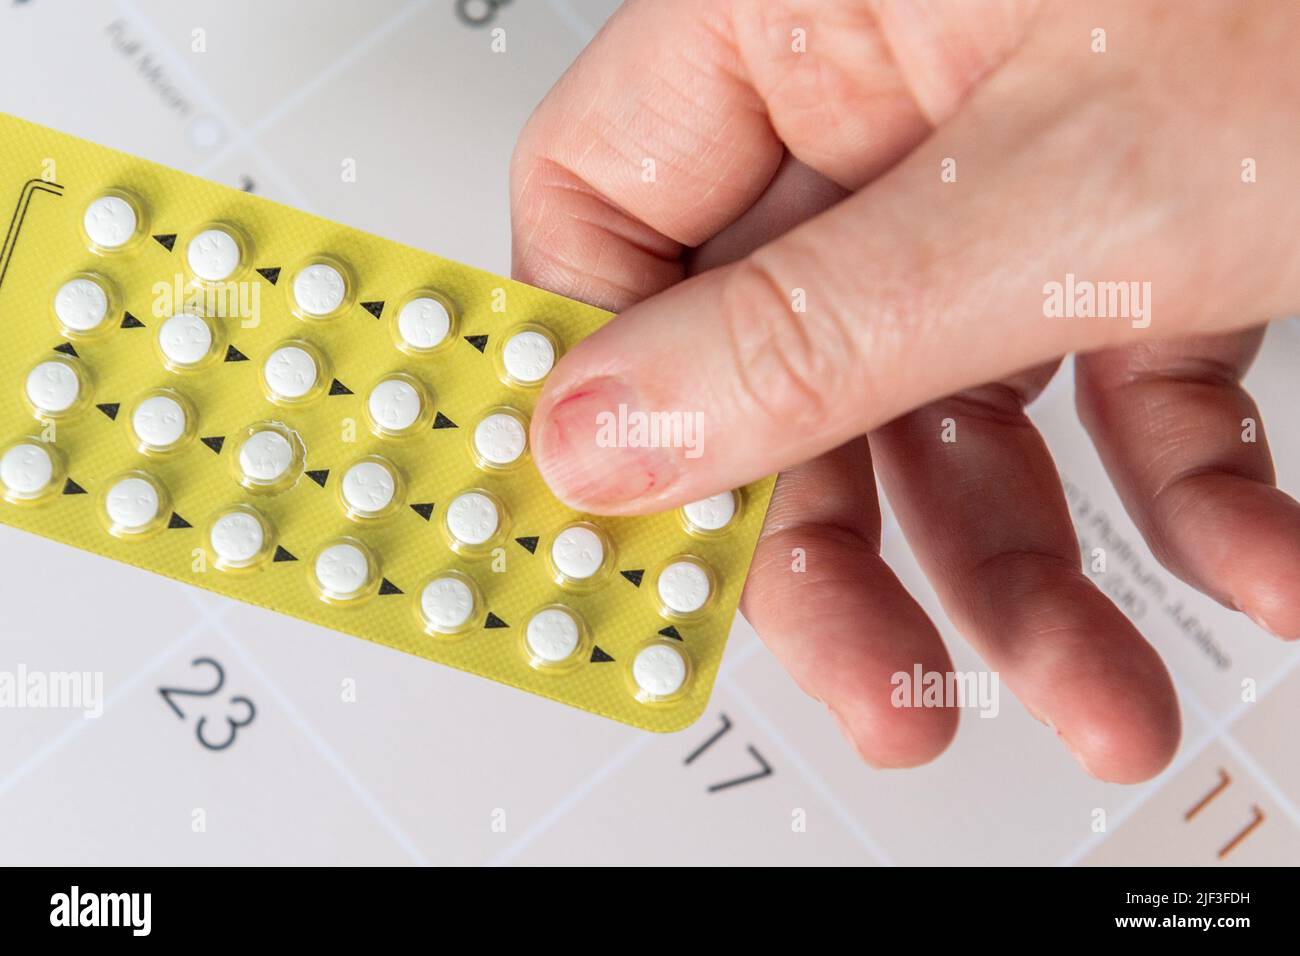 Ireland, 29th June, 2022. Minister Stephen Donnelly TD has secured free contraception for women aged between 17-25 years in Budget 2022. Various types of contraception are thought to be included in the scheme -  contraceptive injections, implants, various types of intrauterine system (IUS) or device (IUD; commonly known as the coil), the contraceptive patch and ring, and various forms of oral contraceptive pill. Credit: AG News/Alamy Live News. Stock Photo